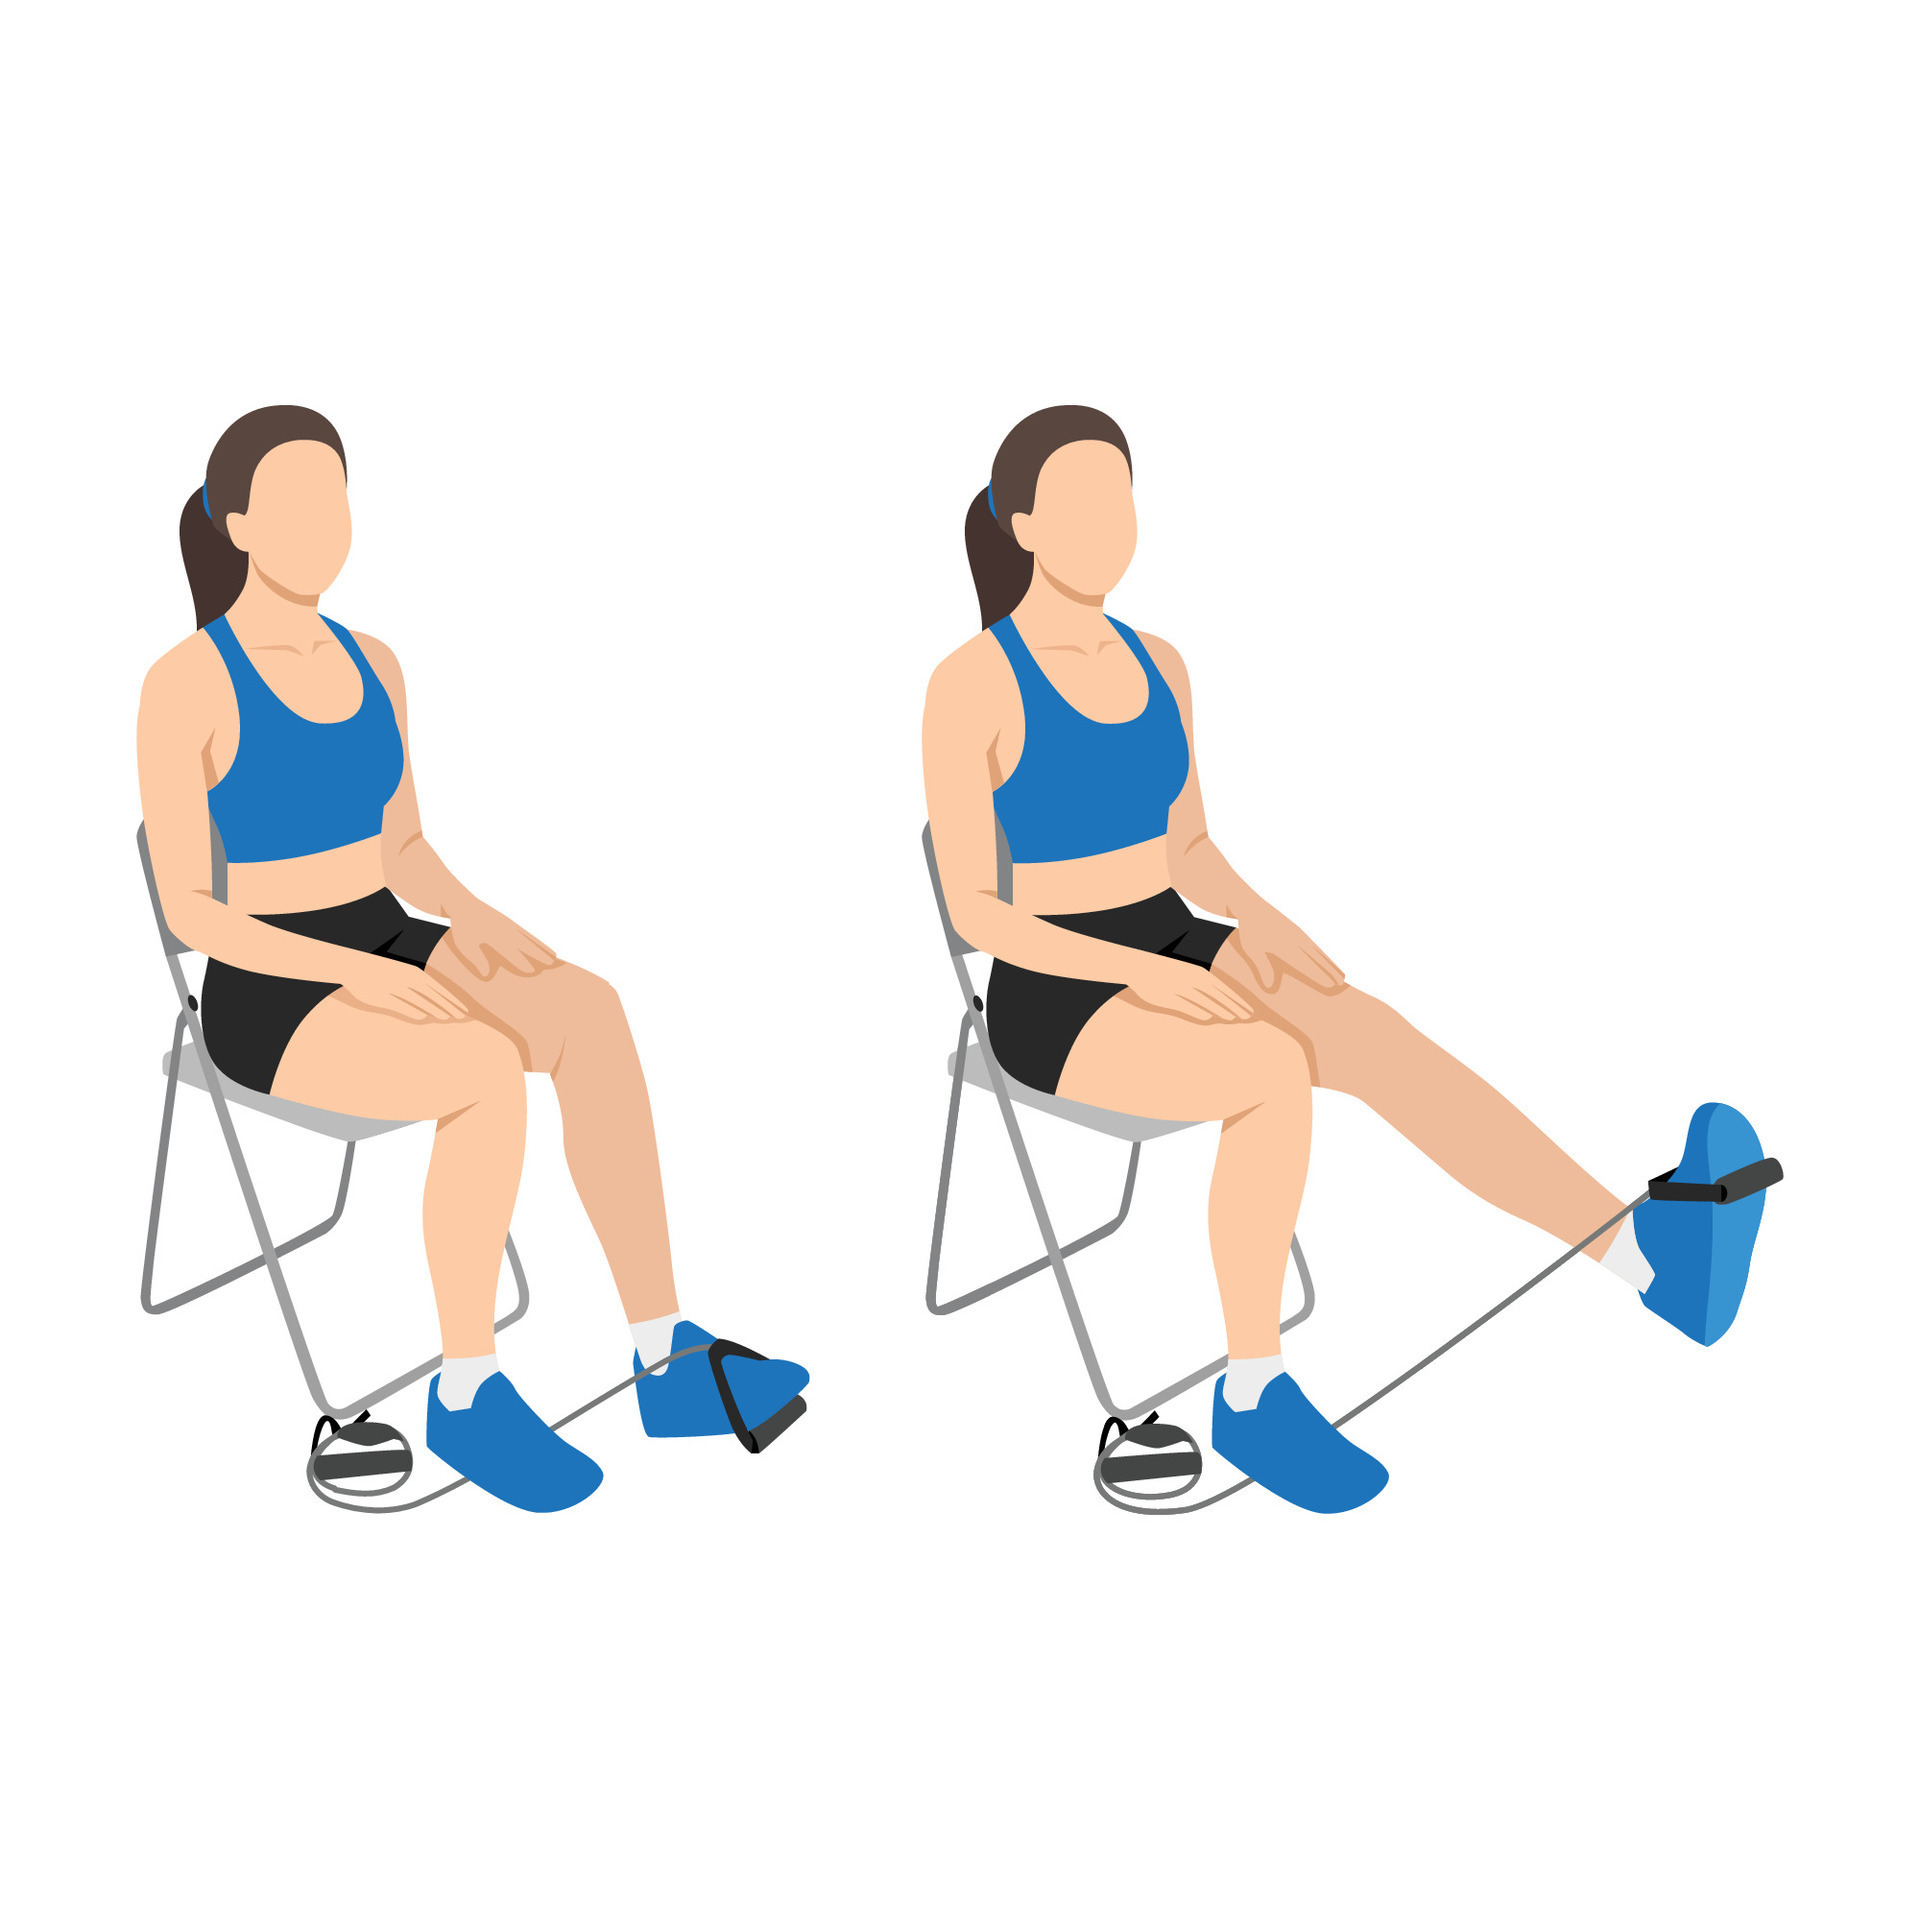 https://static.vecteezy.com/system/resources/previews/032/405/254/original/woman-doing-resistance-band-seated-leg-extensions-exercise-vector.jpg